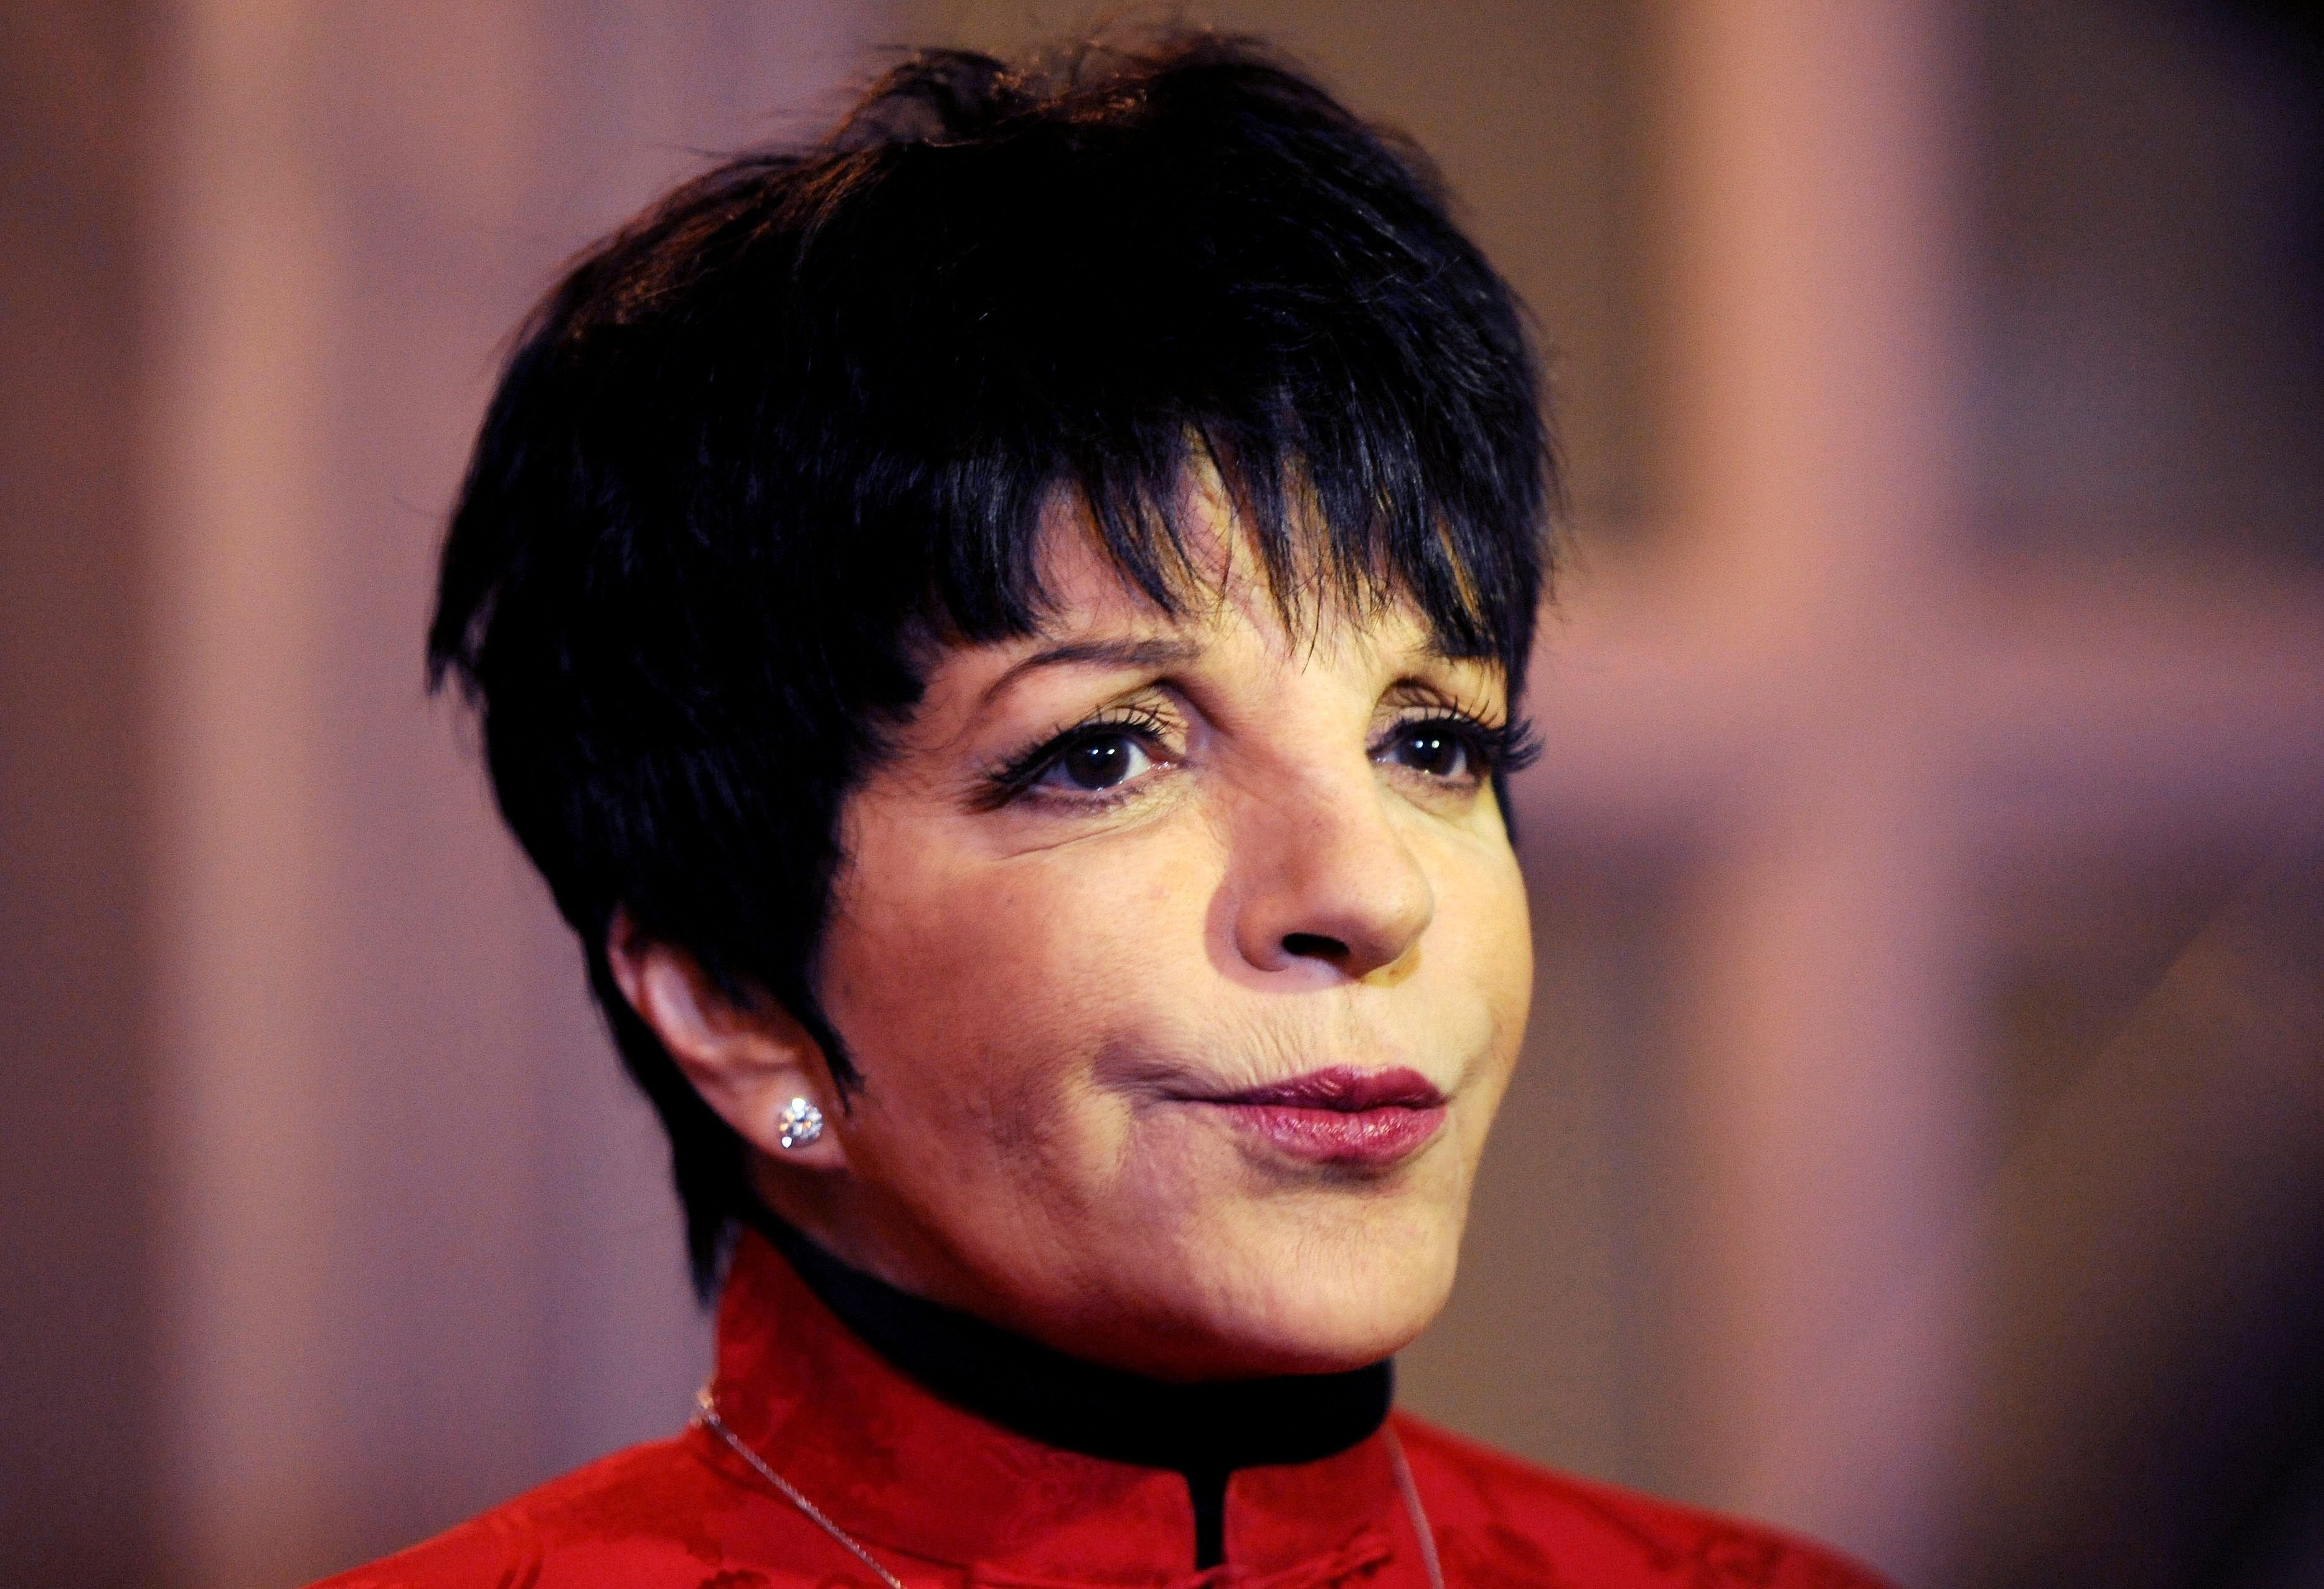 Liza Minnelli at the Nordoff Robbins Silver Clef Awards. | Source: Getty Images